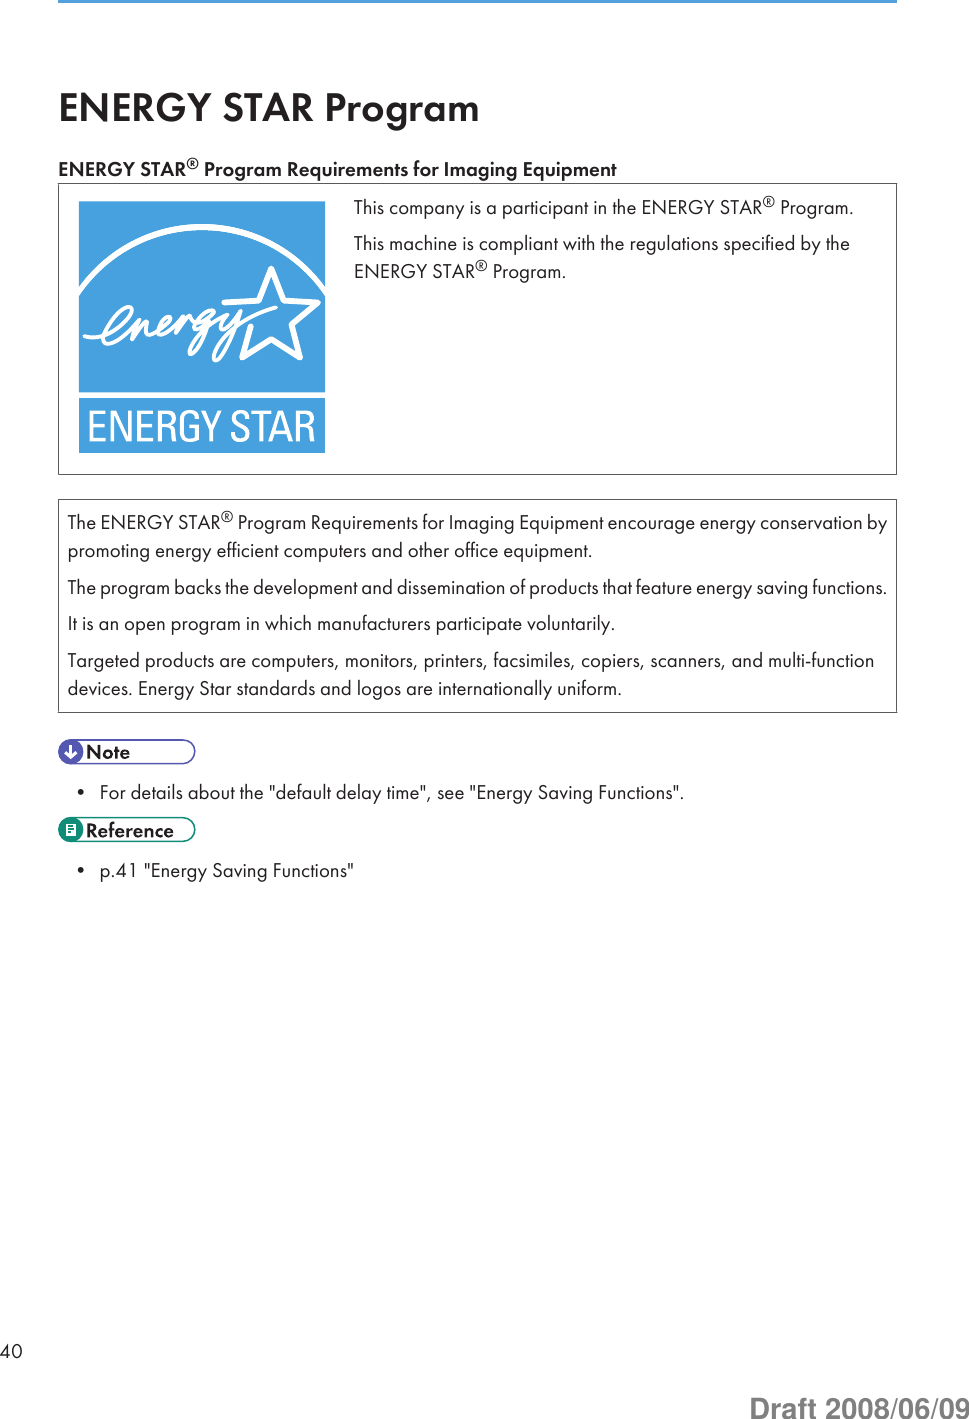 ENERGY STAR ProgramENERGY STAR® Program Requirements for Imaging EquipmentThis company is a participant in the ENERGY STAR® Program.This machine is compliant with the regulations specified by theENERGY STAR® Program.The ENERGY STAR® Program Requirements for Imaging Equipment encourage energy conservation bypromoting energy efficient computers and other office equipment.The program backs the development and dissemination of products that feature energy saving functions.It is an open program in which manufacturers participate voluntarily.Targeted products are computers, monitors, printers, facsimiles, copiers, scanners, and multi-functiondevices. Energy Star standards and logos are internationally uniform.• For details about the &quot;default delay time&quot;, see &quot;Energy Saving Functions&quot;.• p.41 &quot;Energy Saving Functions&quot;40Draft 2008/06/09